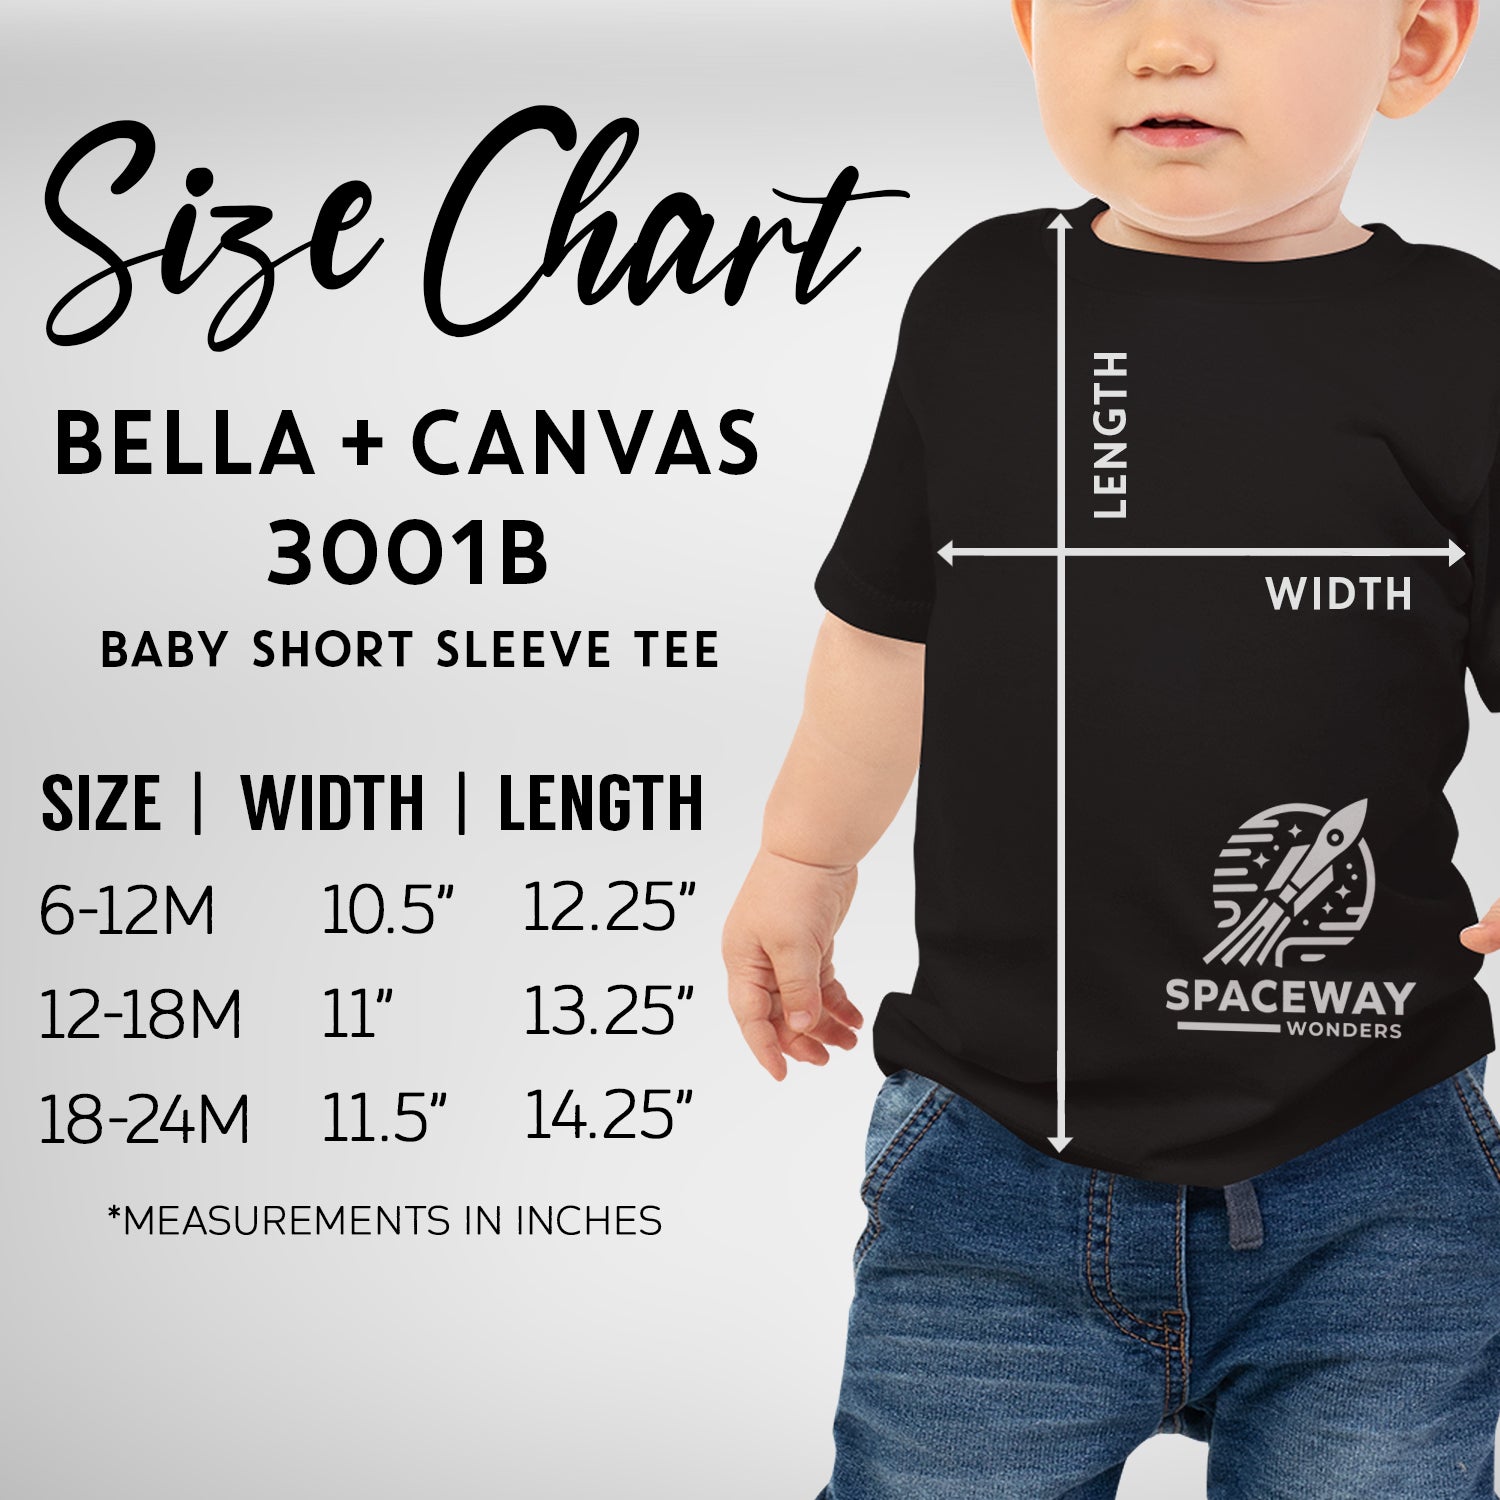 1st Birthday Shirt, Dabbing Astronaut, Space Party - One Year Old Solar System Tee